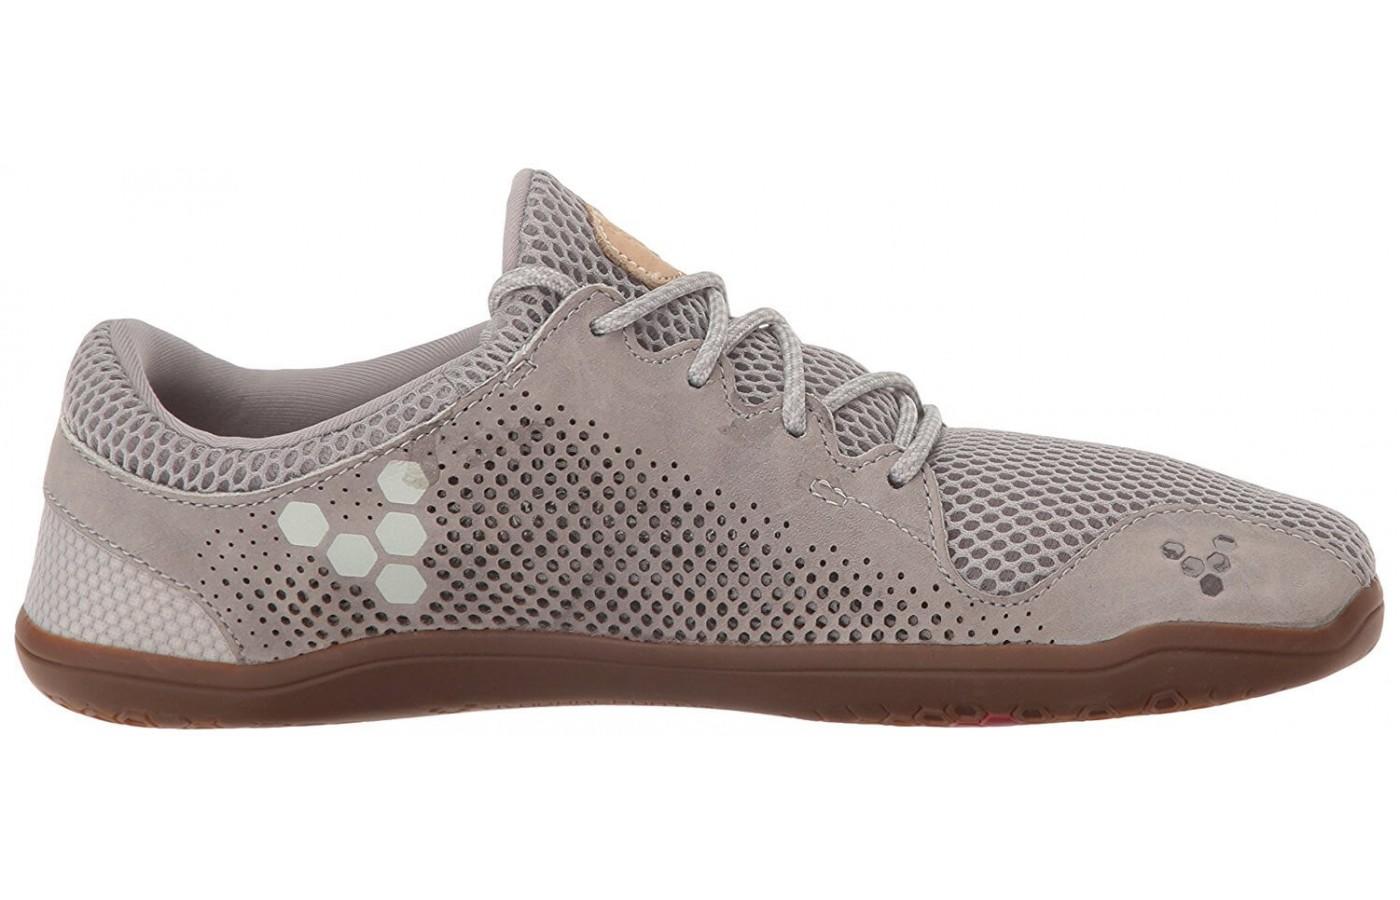 The upper of the Vivobarefoot Primus Trio is very breathable